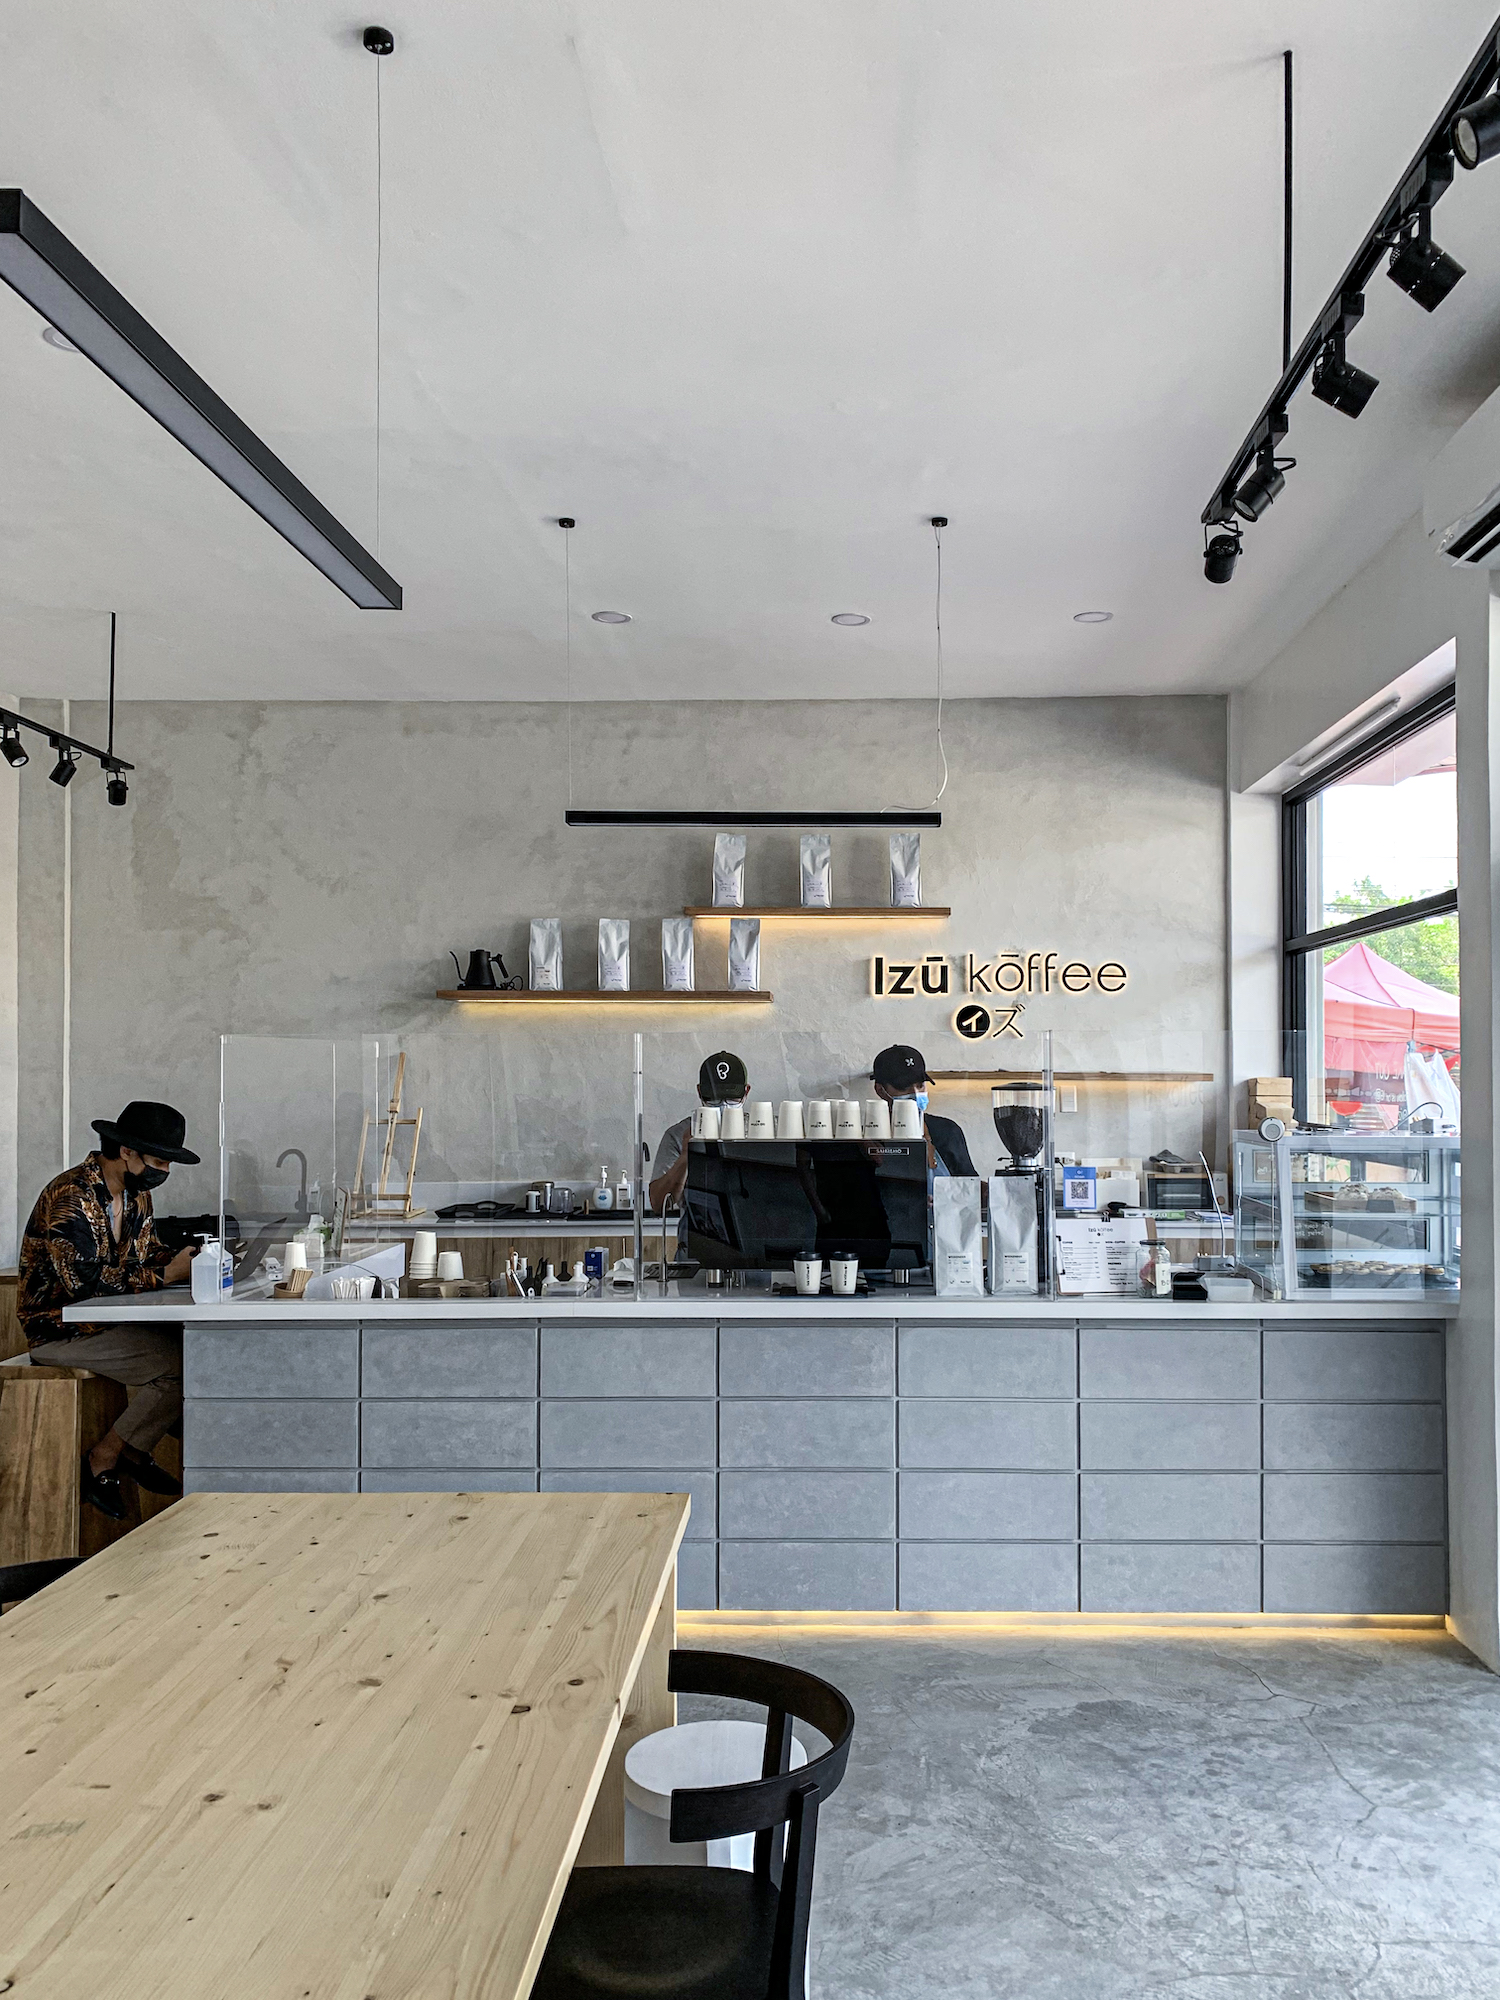 A minimalist design has become something of a cafe blueprint in the local coffee scene